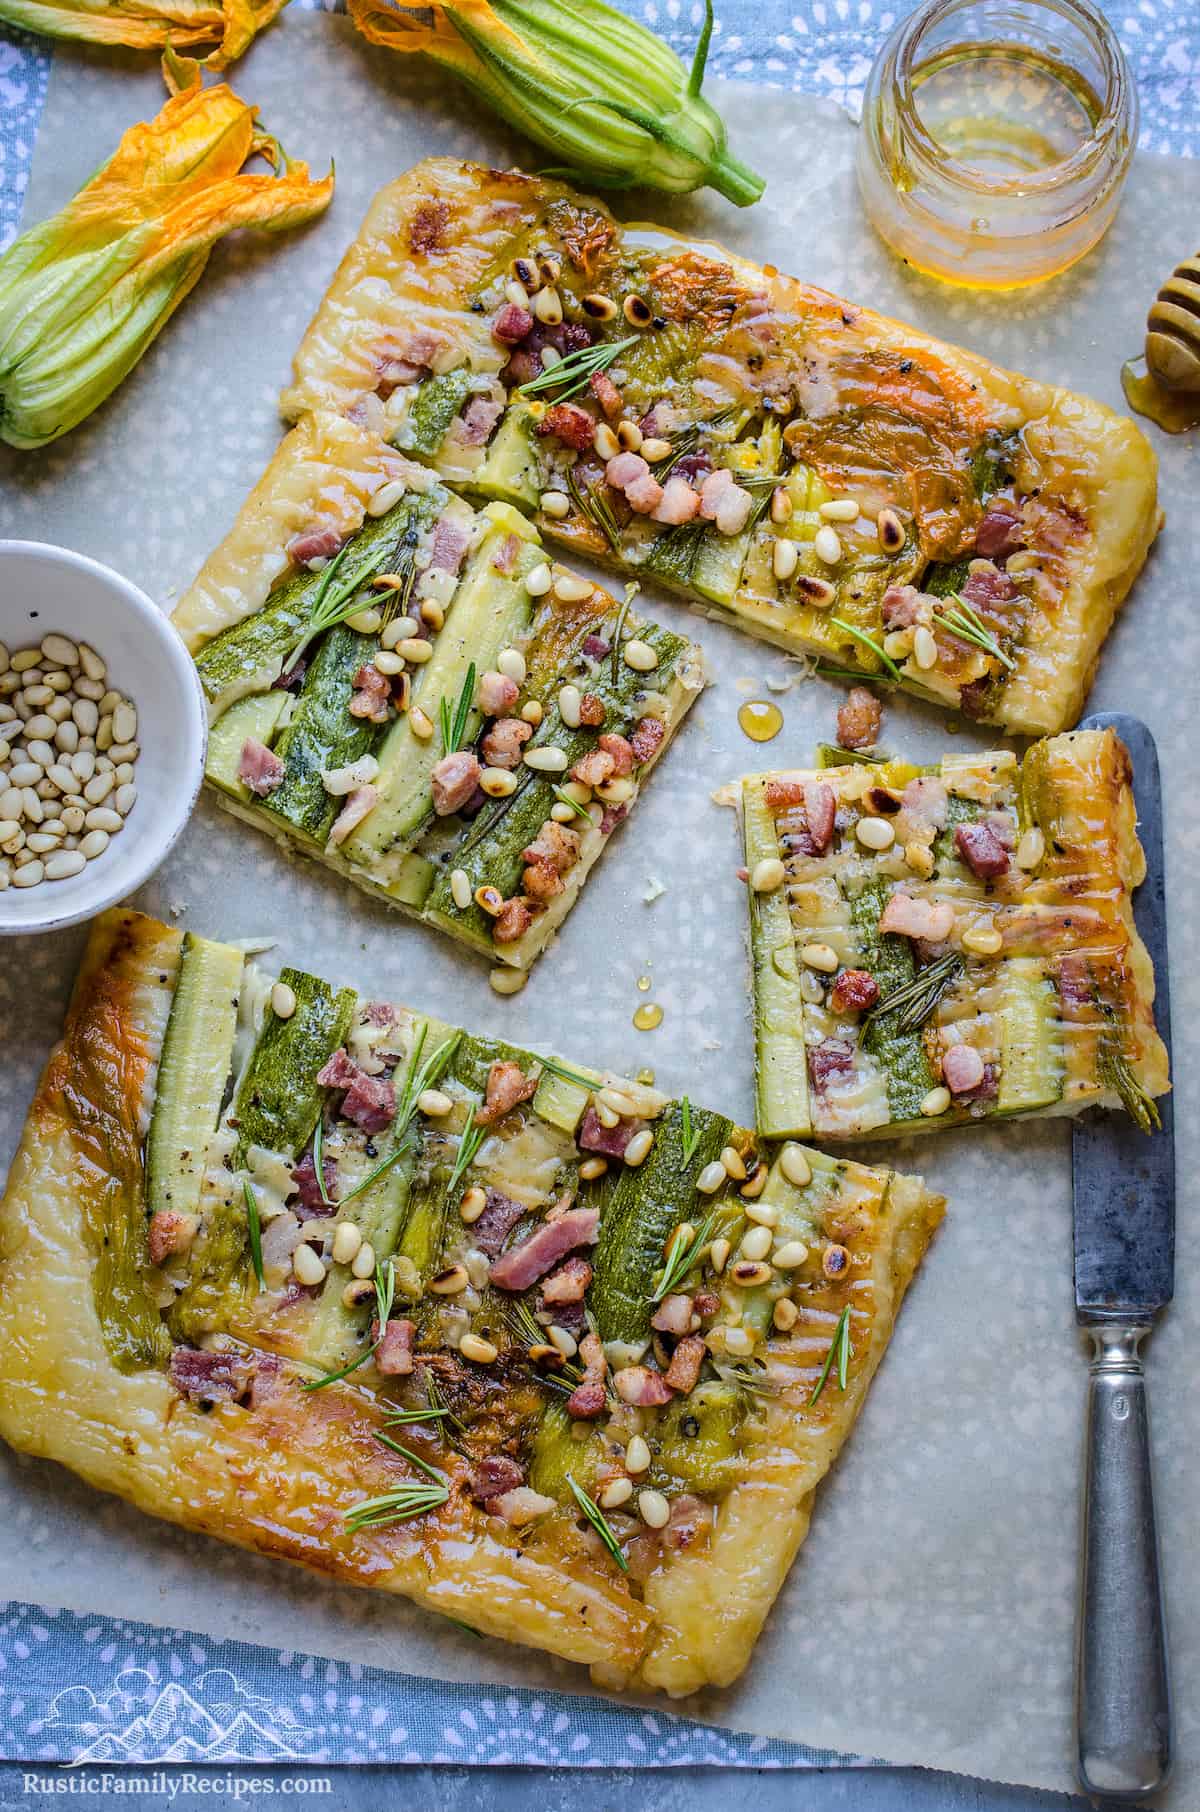 A zucchini tart cut into slices on top of a sheet of parchment paper, surrounded by a bowl of pine nuts and zucchini flowers.